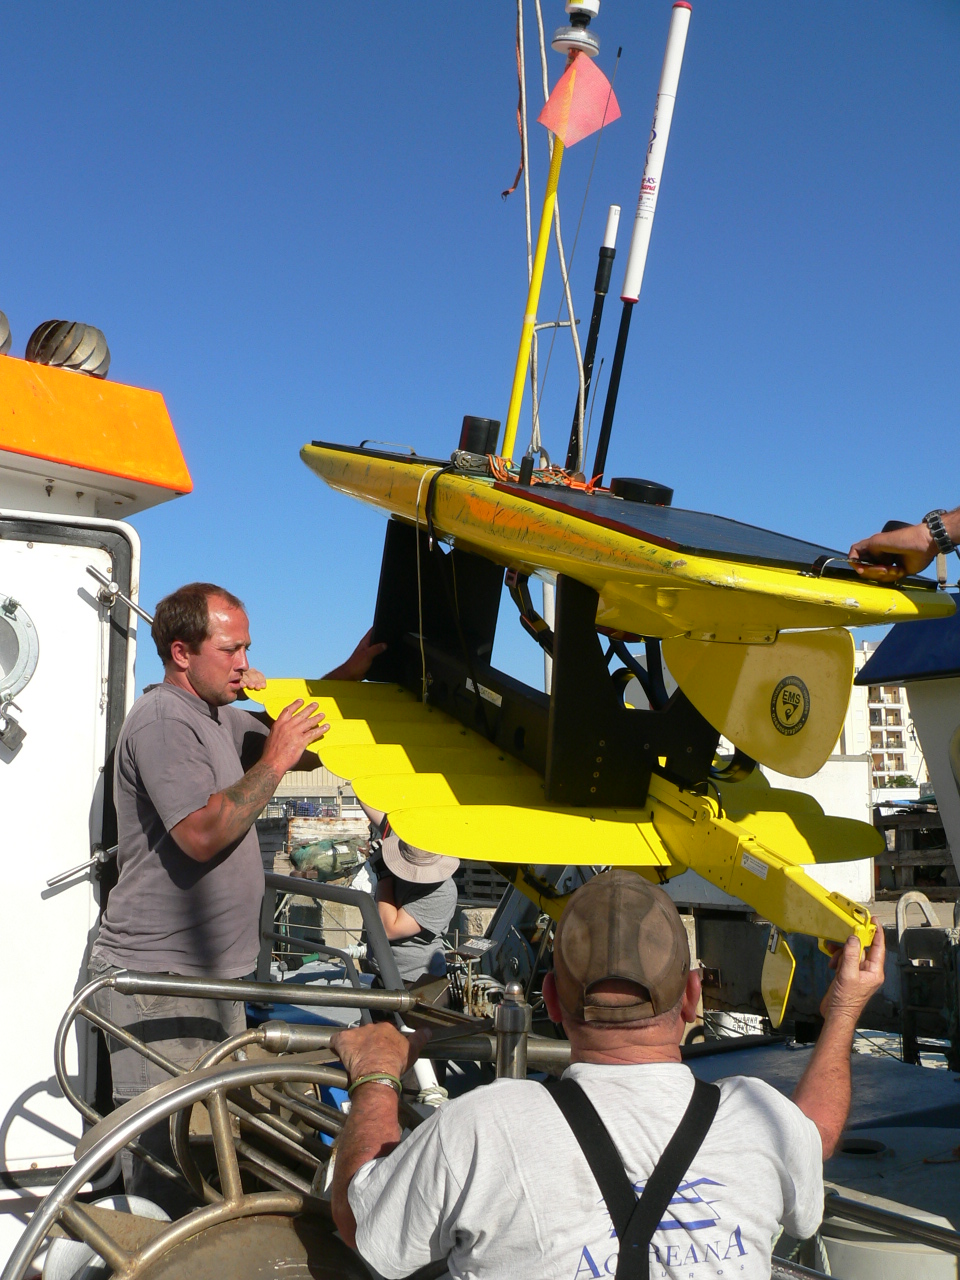 In getting ready to (finally) fly the UAVs from the Diplodus, space is made on the deck by removing the WaveGlider by the crew. The WG also had to have its electronics box replaced, so having it on shore was critical. The UAV team was excited in finally getting to sea...!